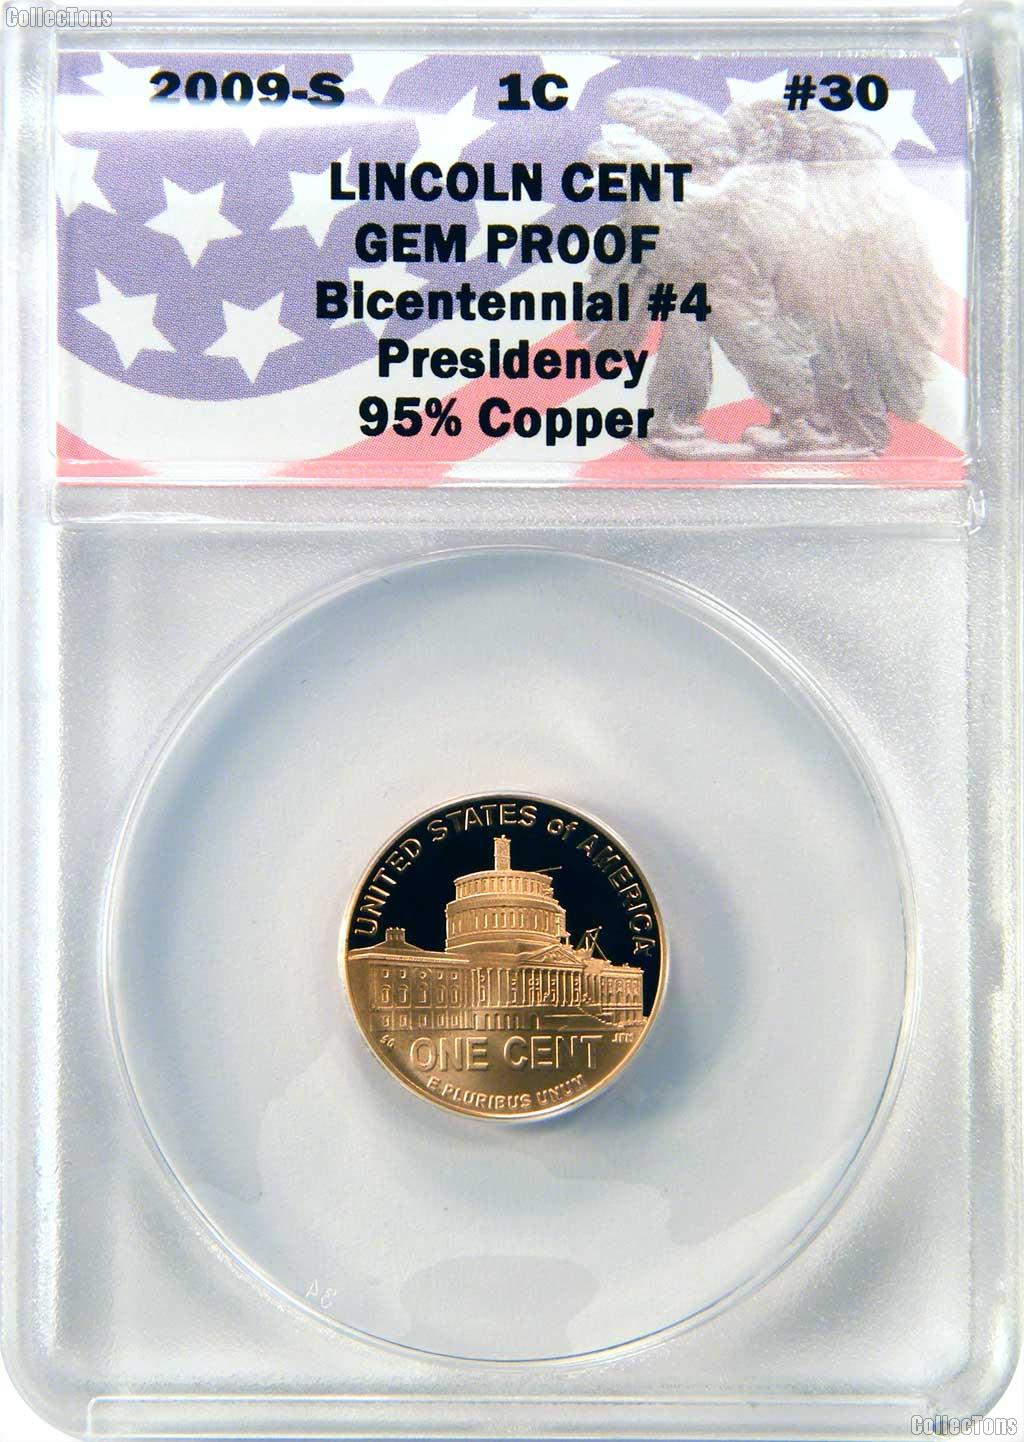 CollecTons Keepers #27- #30: 2009 Lincoln Bicentennial  Complete Proof Cent Collection Certified in Exclusive ANACS GEM Proof Holder